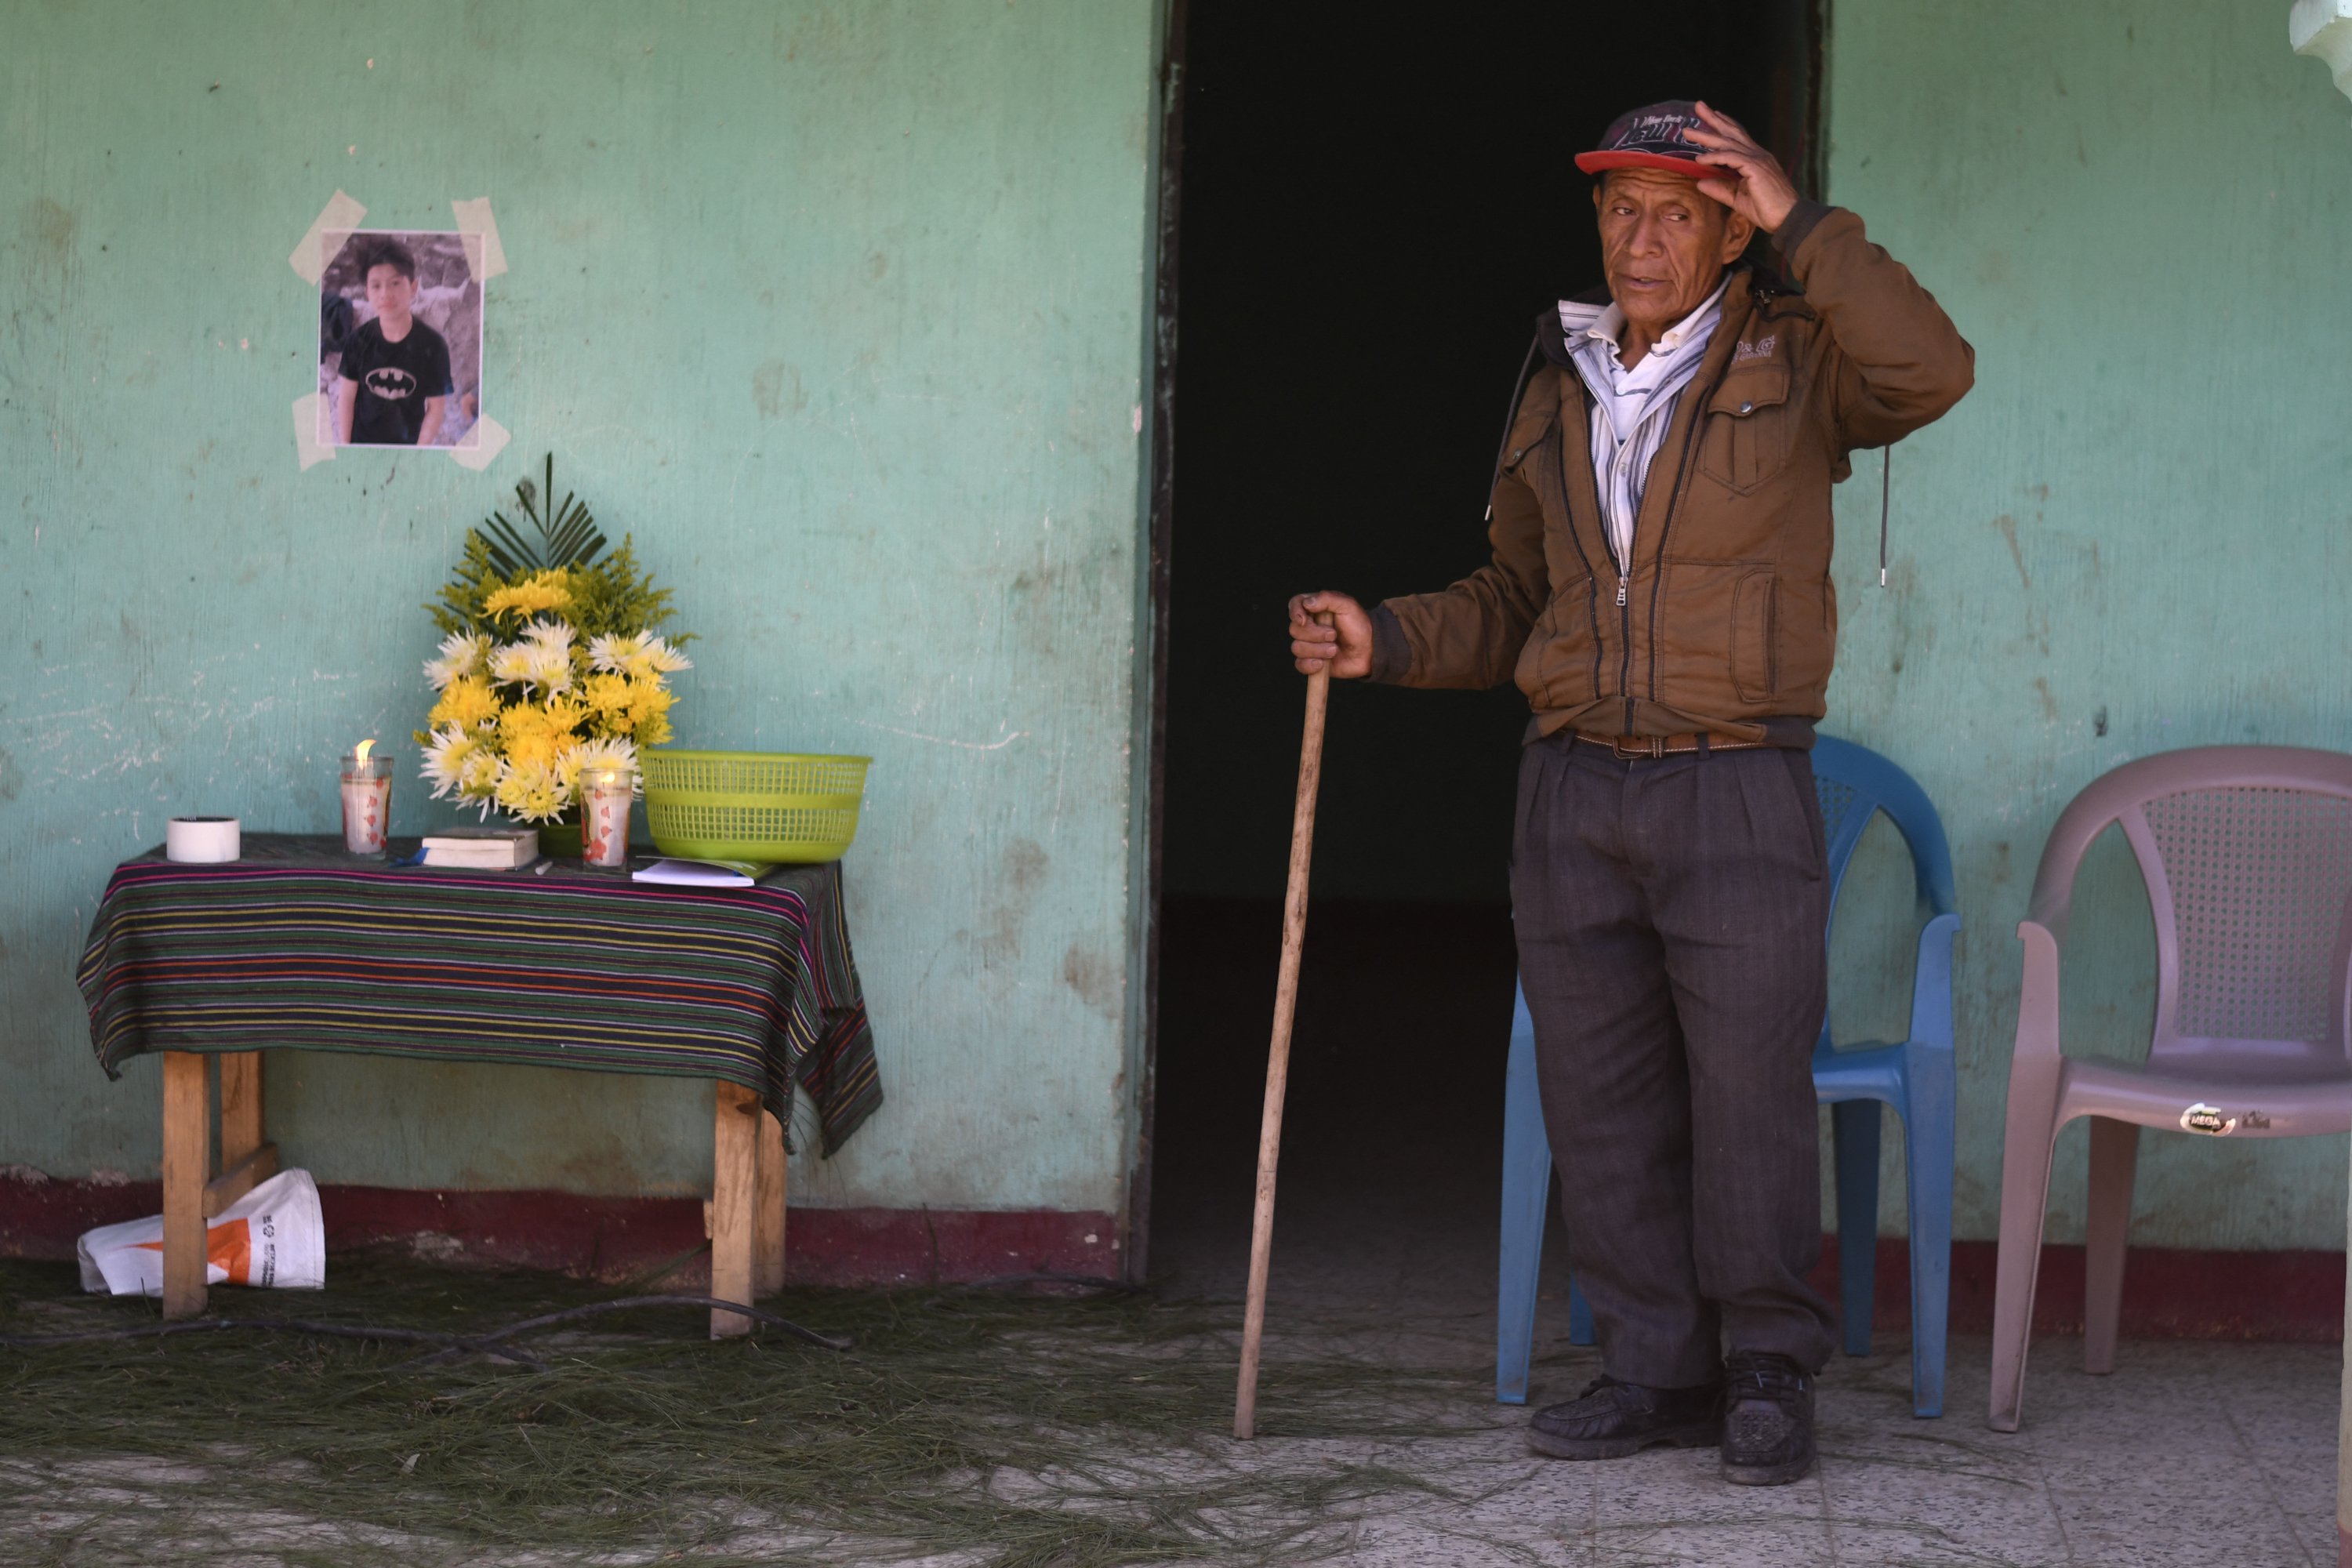 Juan Wilmer's grandfather in Guatemala in 2022. | Source: Getty Images